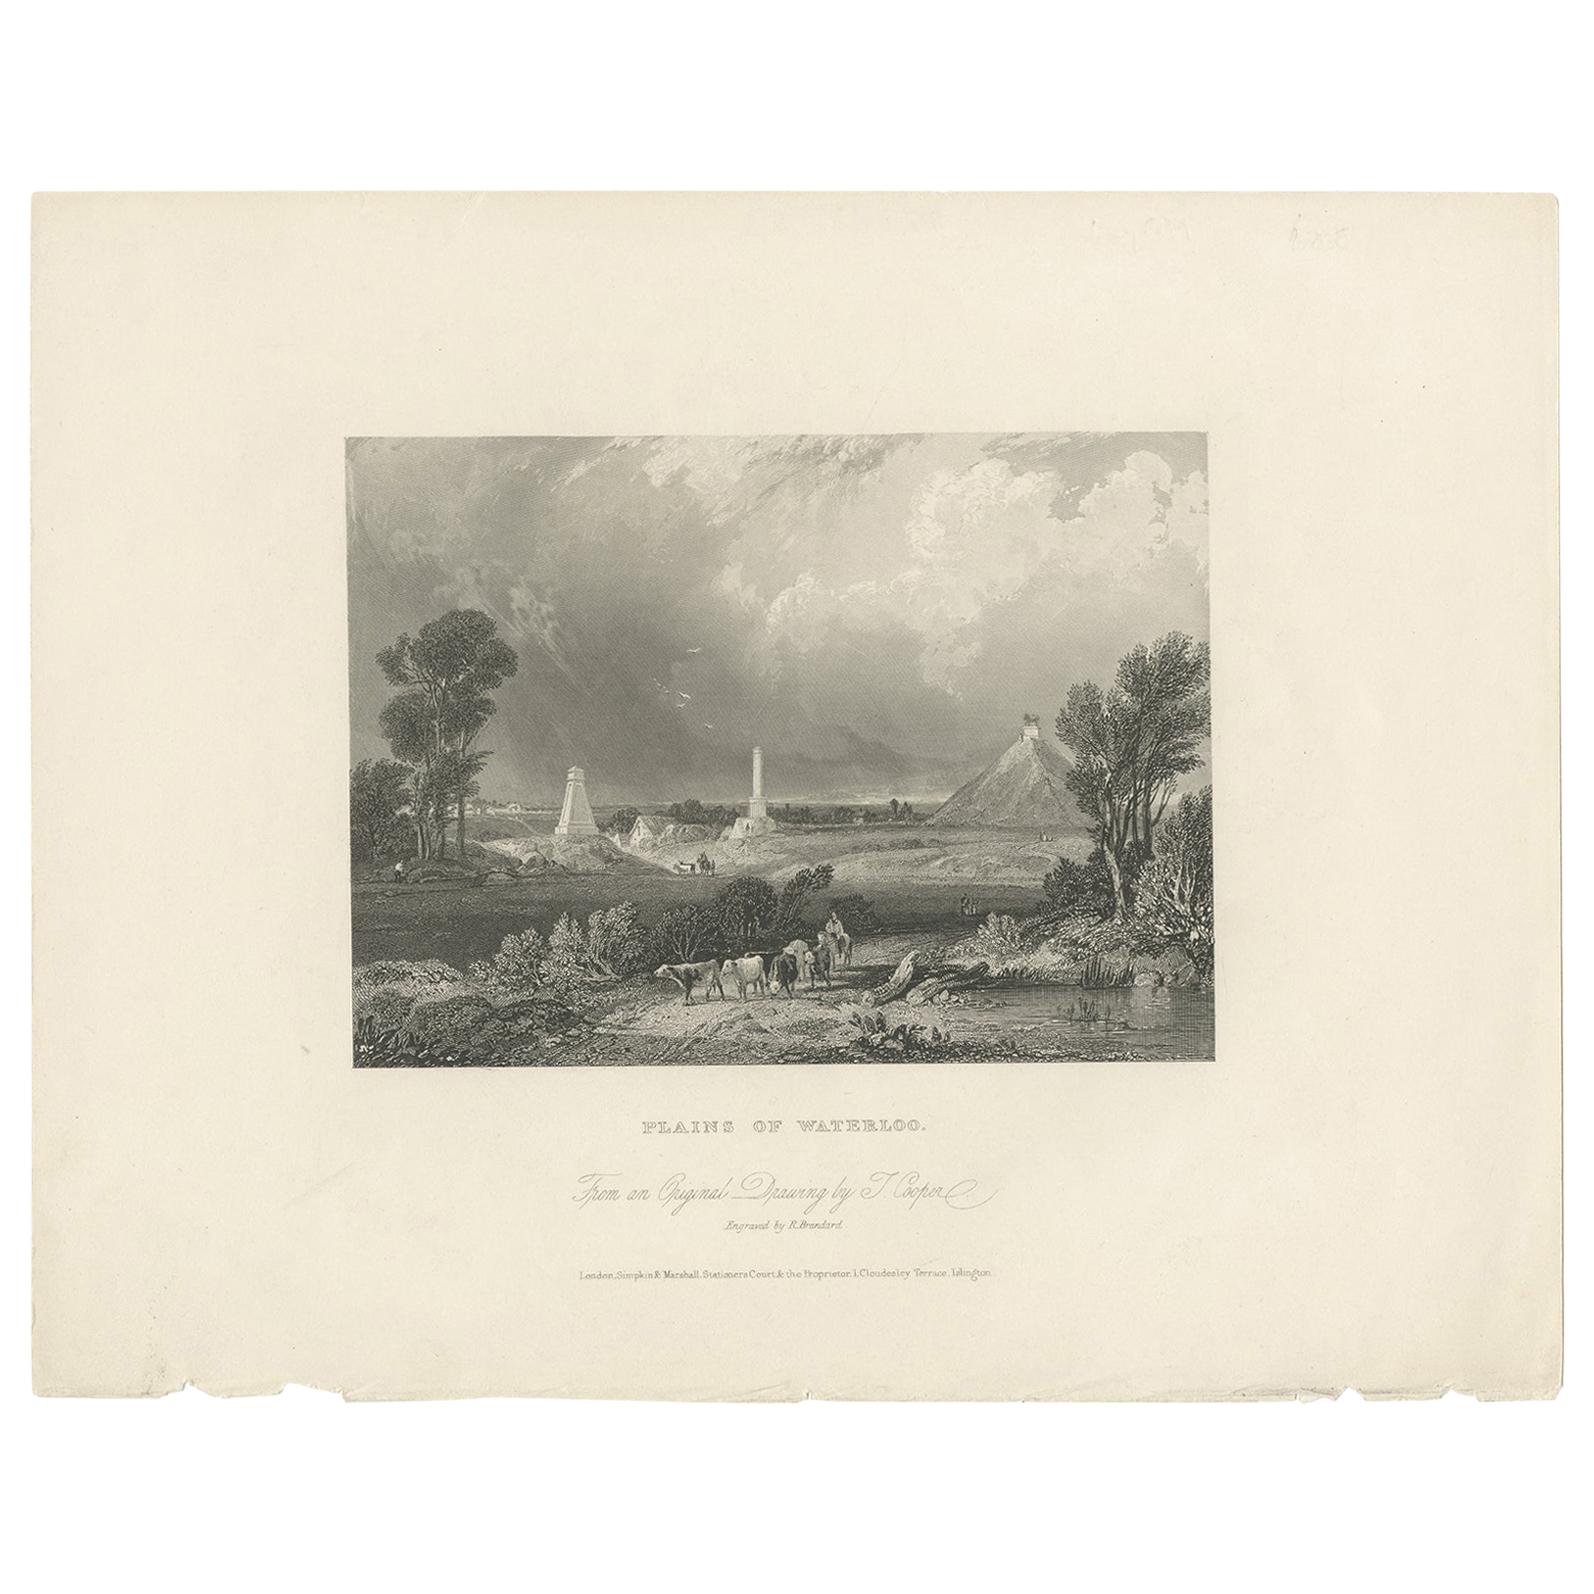 Antique Print of the Monuments on the Site of the Battle of Waterloo 'c.1840'